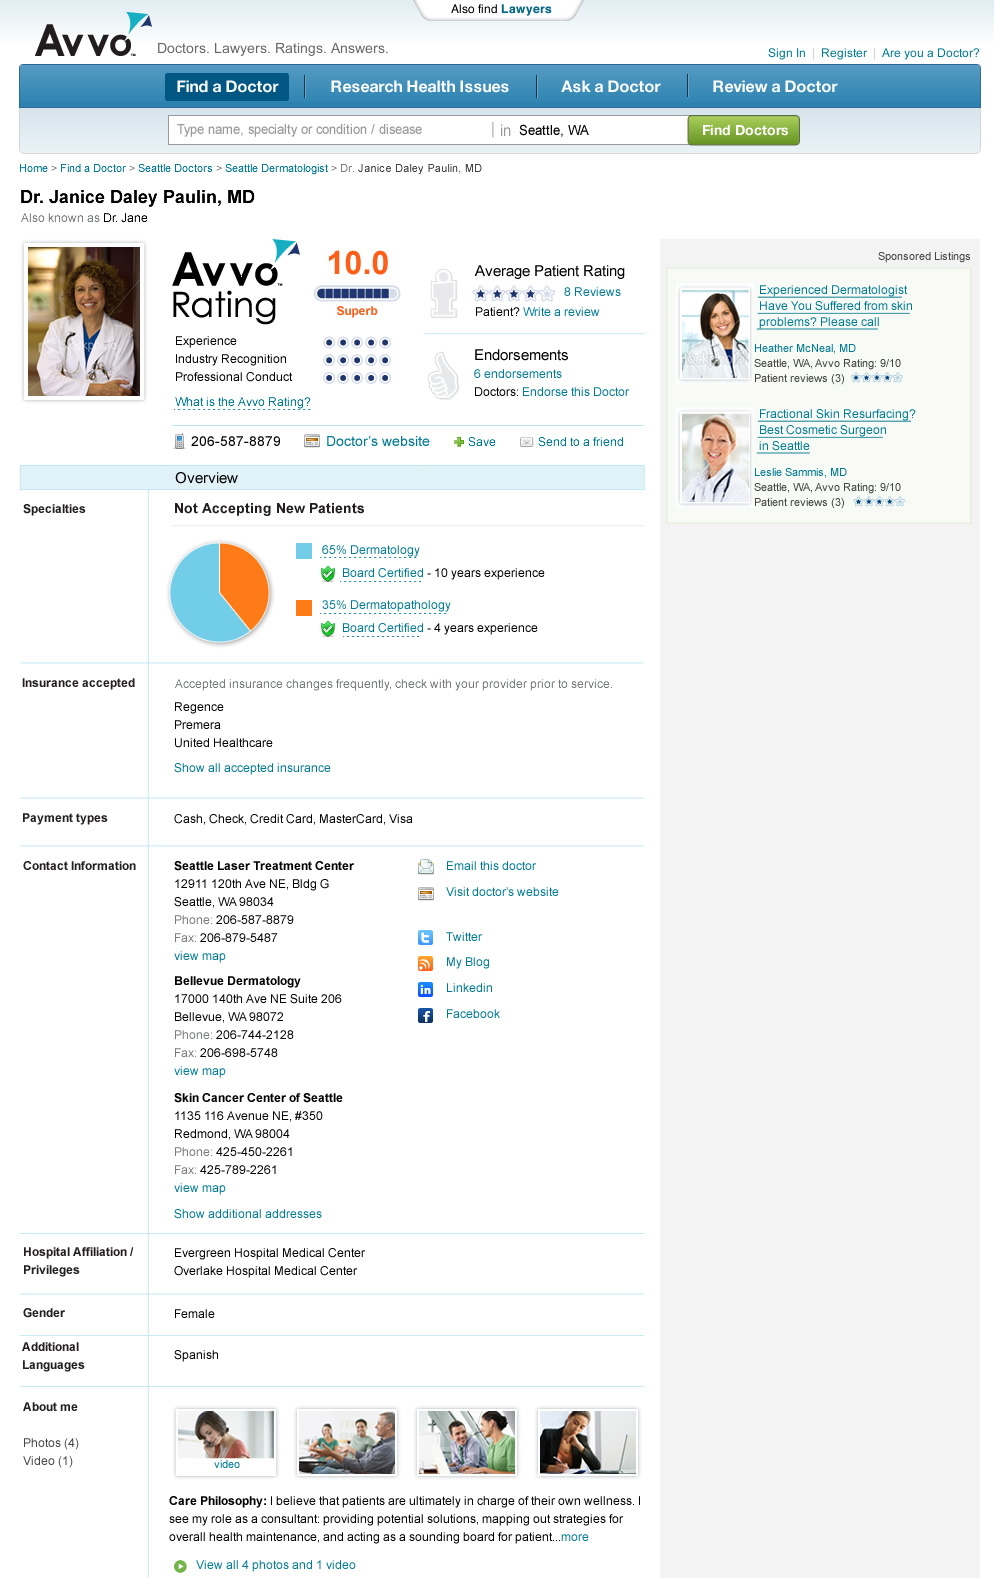 Lawyer-Rating Site Avvo Adds Doctor Ratings